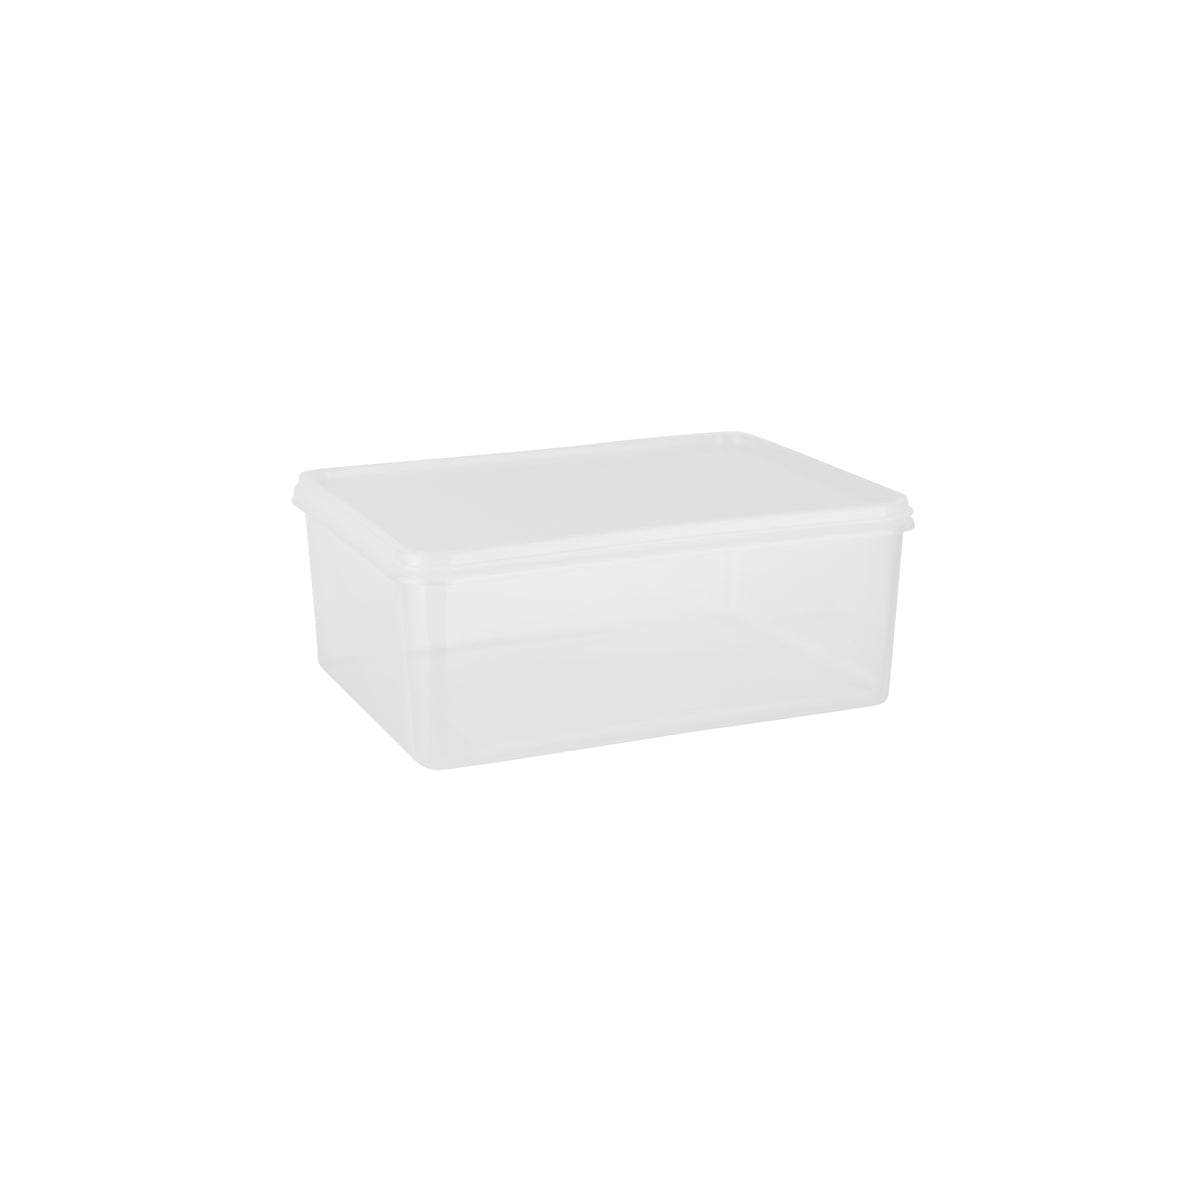 09622 Unica Storage Container Natural 280x210x115mm / 5Lt Tomkin Australia Hospitality Supplies